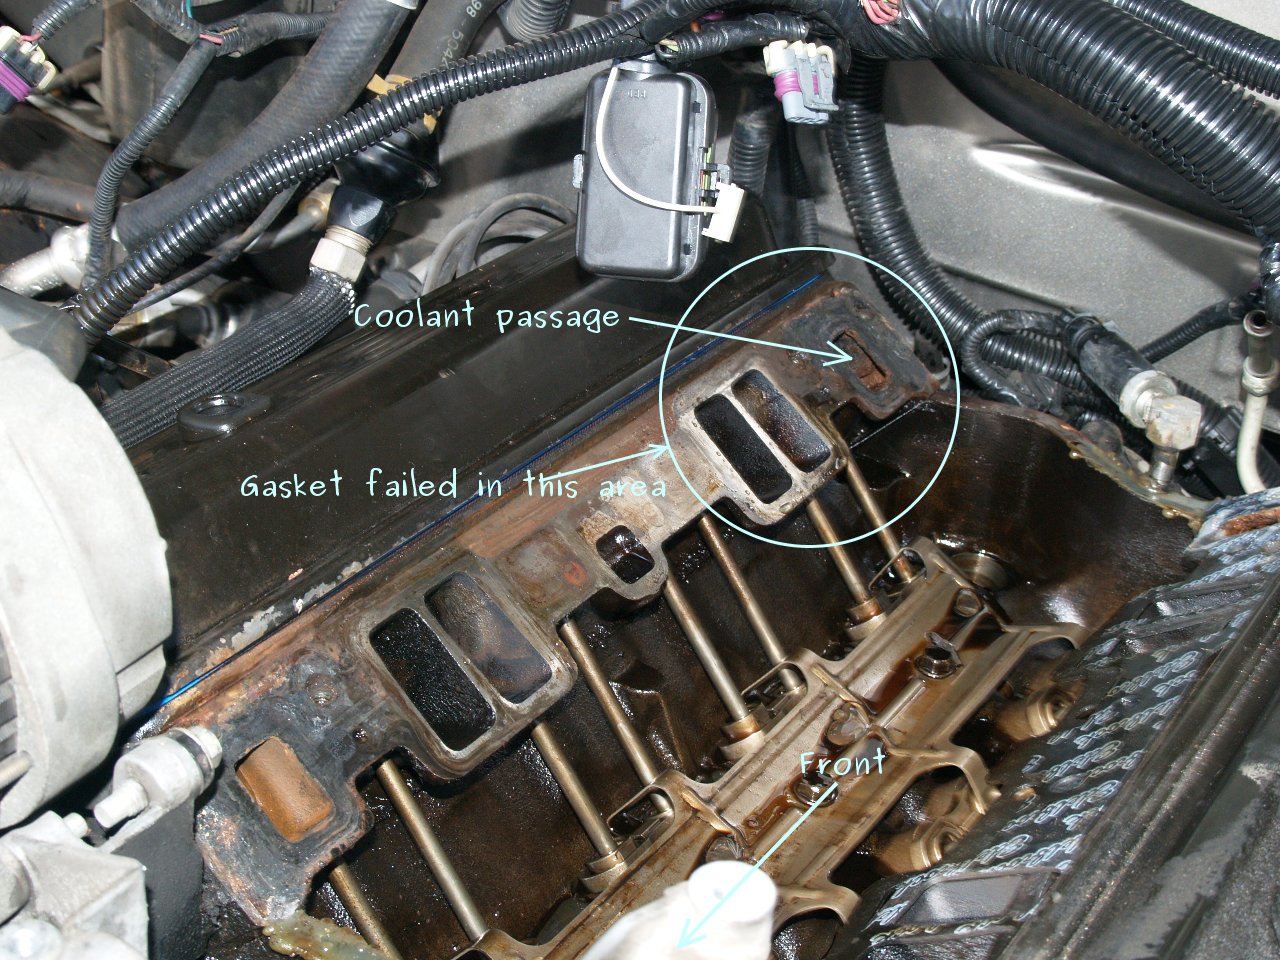 See P233E in engine